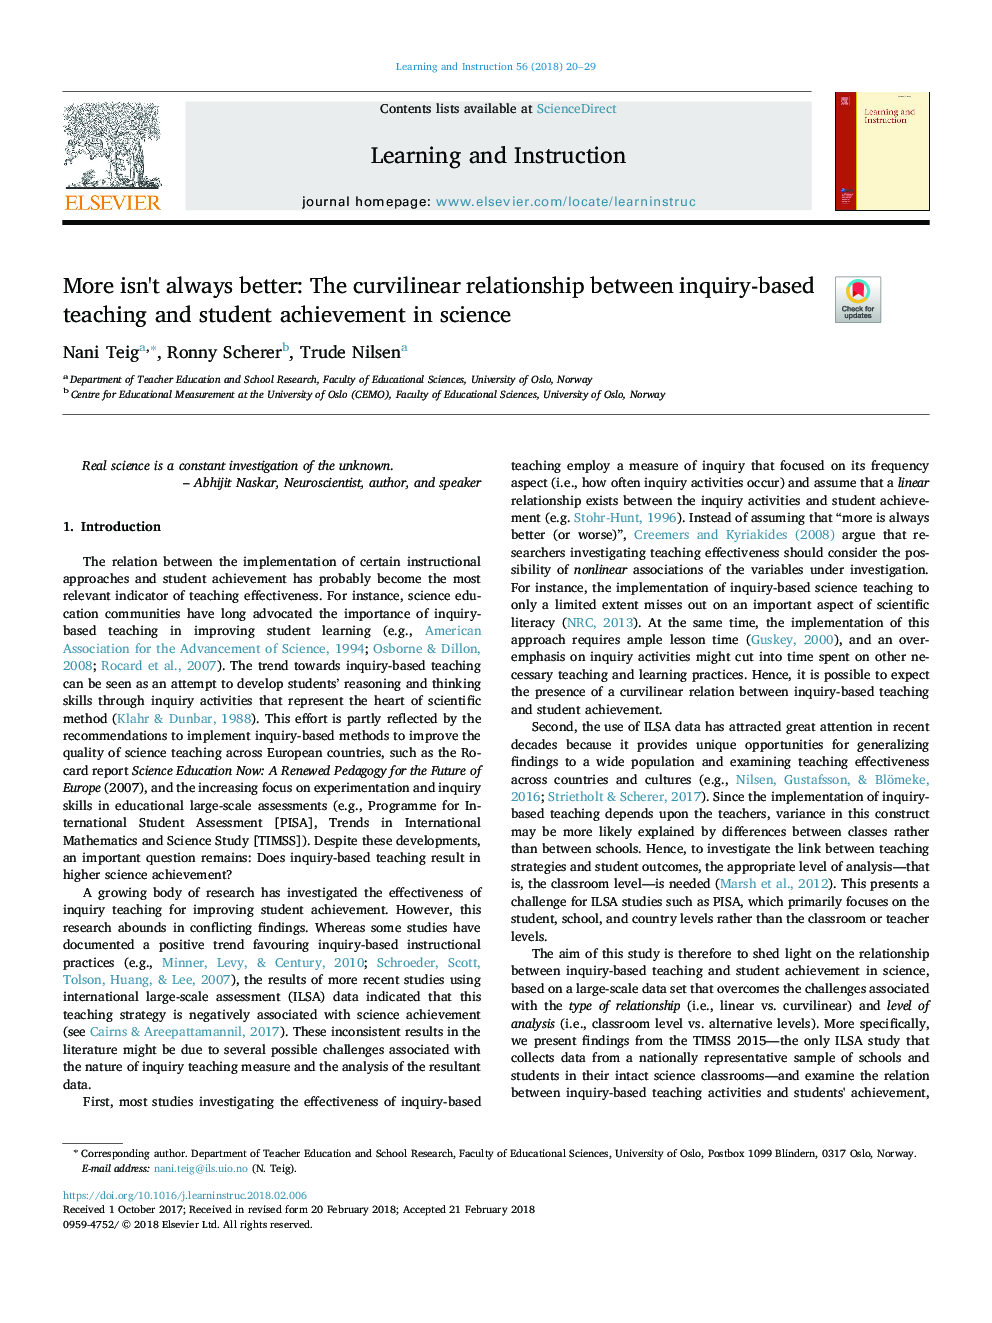 More isn't always better: The curvilinear relationship between inquiry-based teaching and student achievement in science